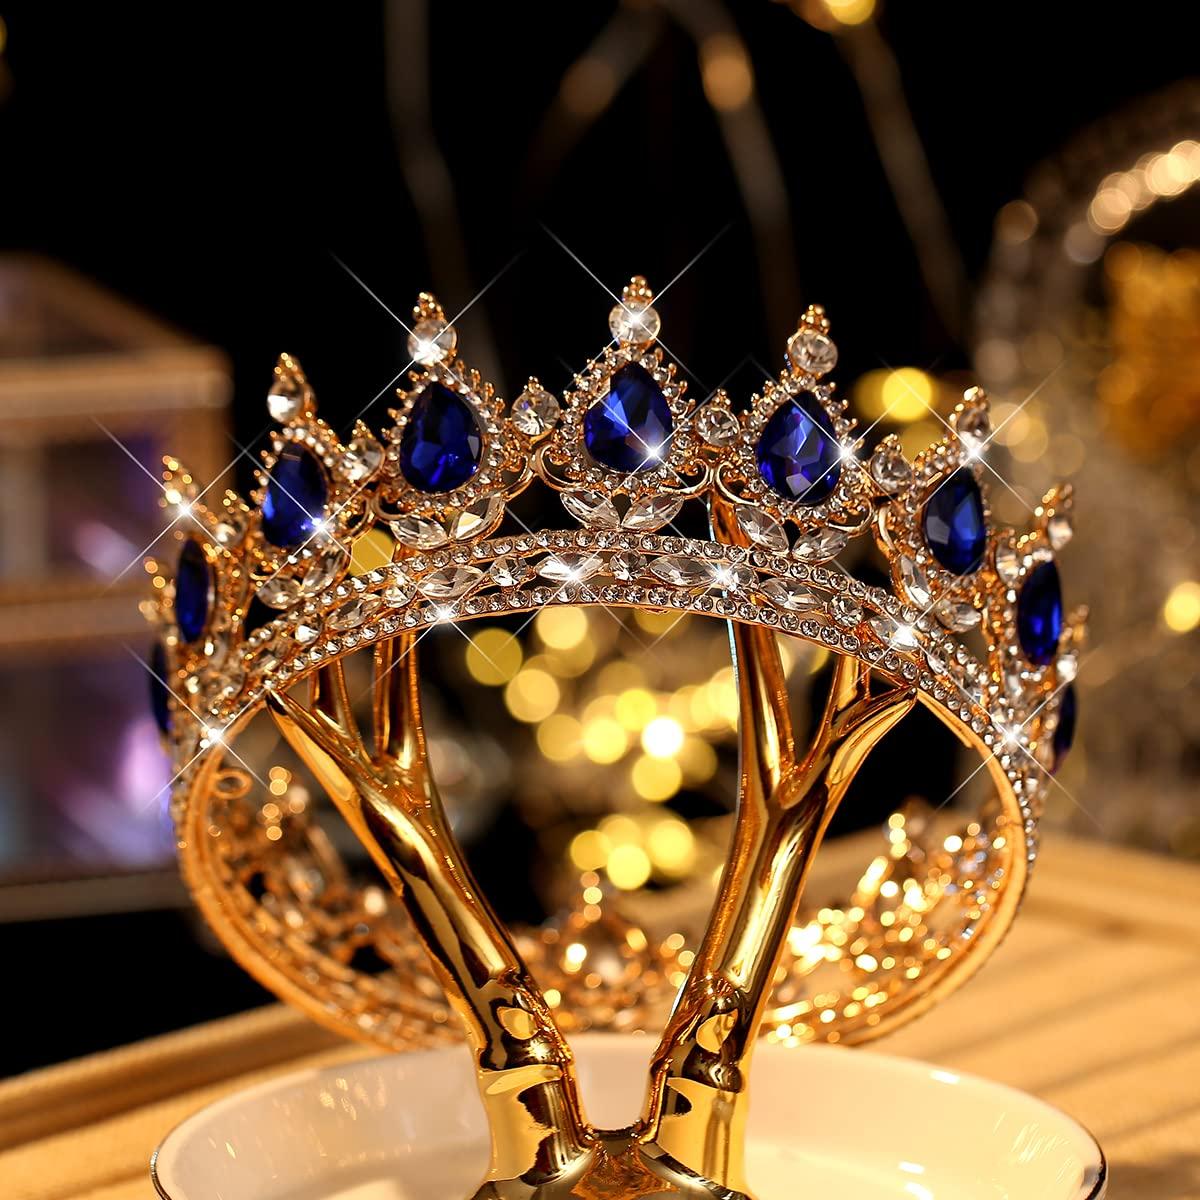 King Queen Blue Sapphire Tiara Diadem Bridal Crystal Crown Pageant Prom  Party